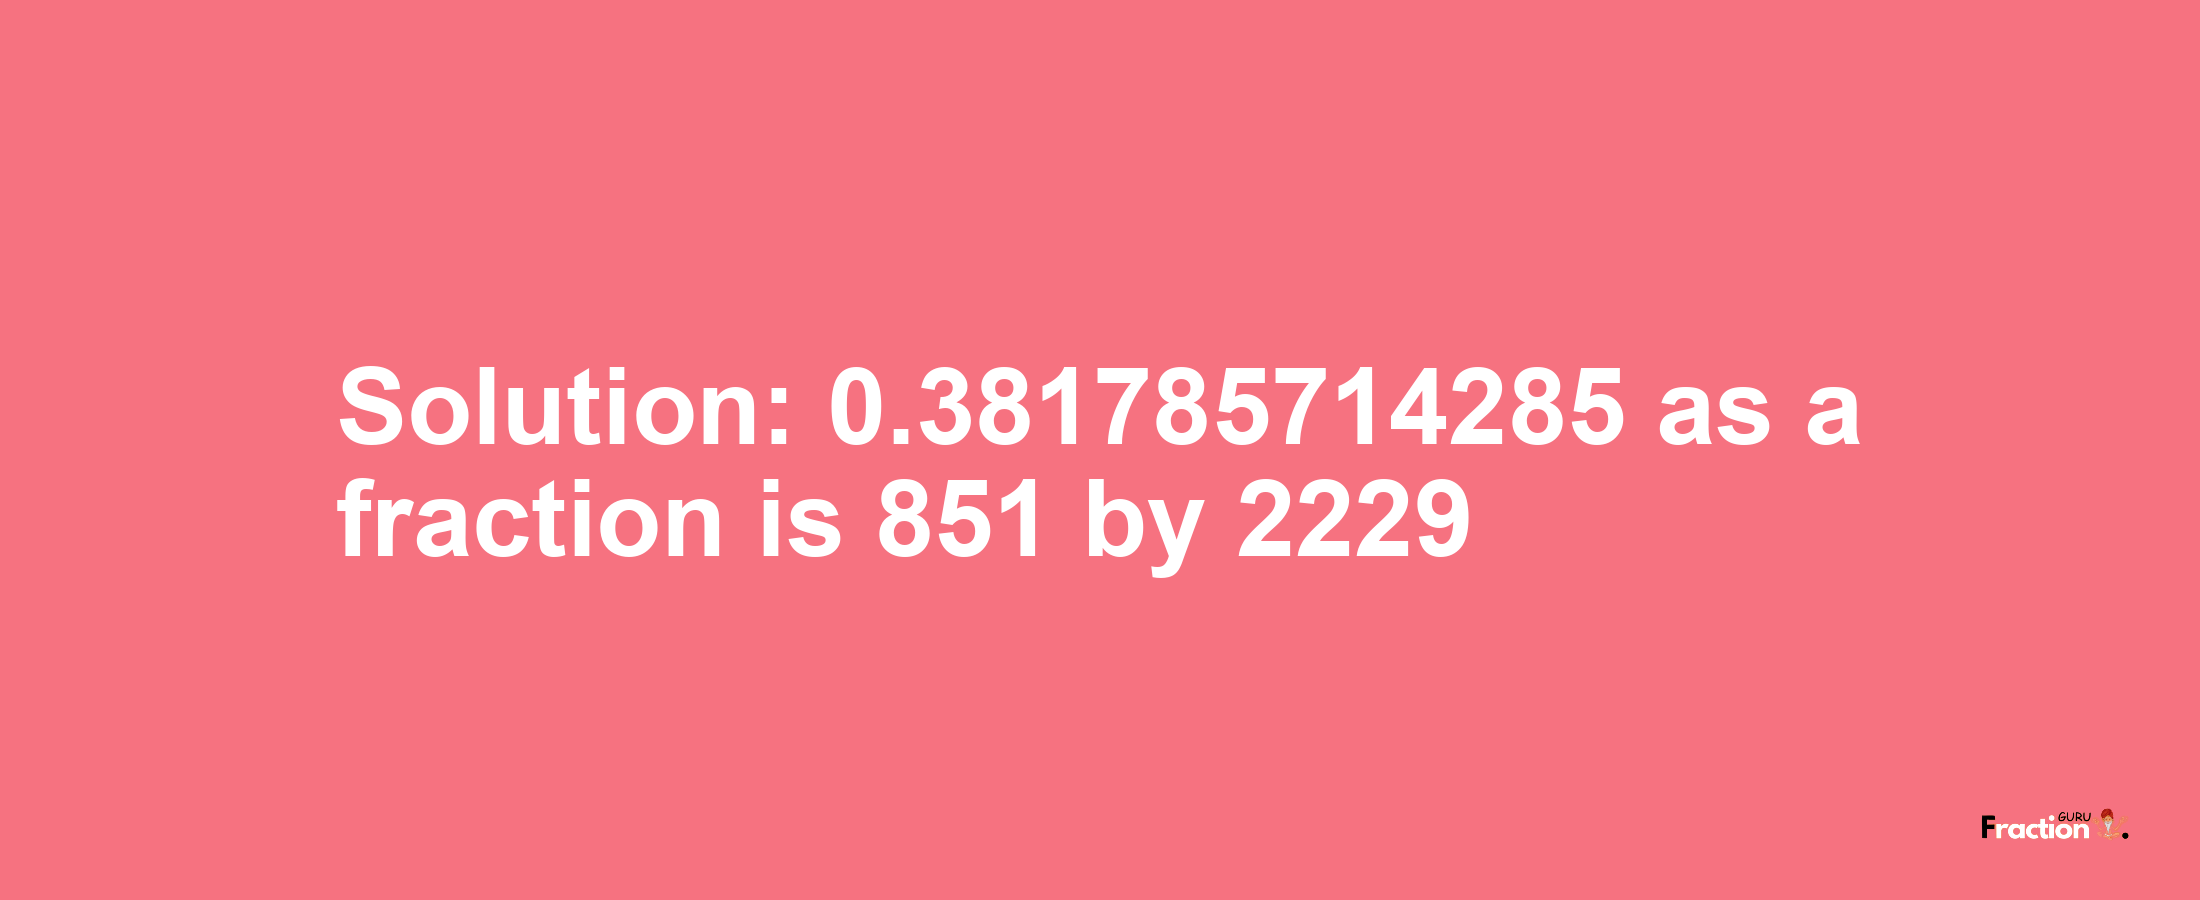 Solution:0.381785714285 as a fraction is 851/2229